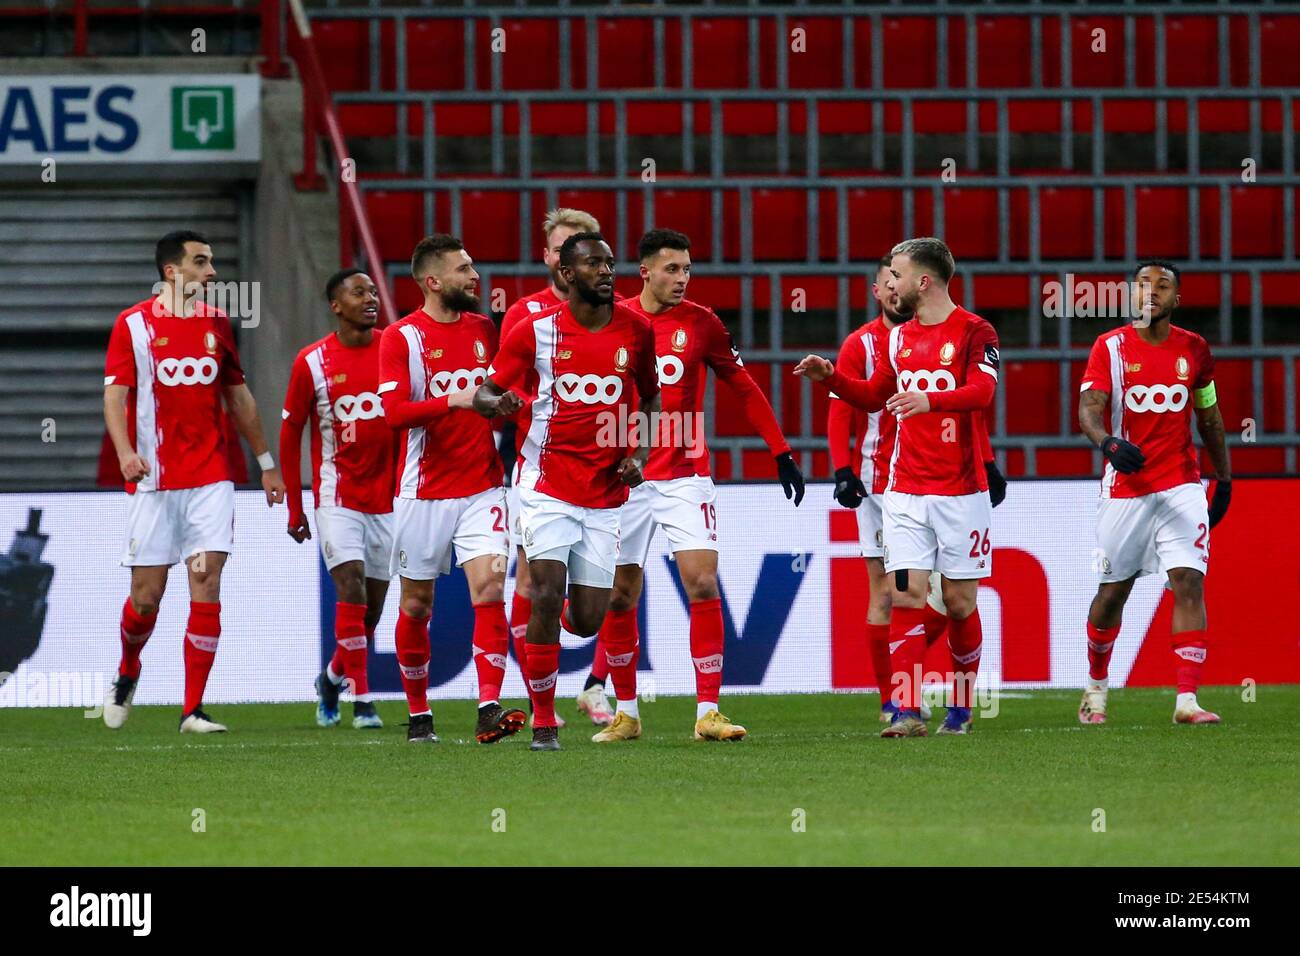 Liege Belgium January 24 Players Of Standard De Liege Celebrate A Goal During The Pro League Match Between Standard Liege And Charleroi At Maurice Stock Photo Alamy